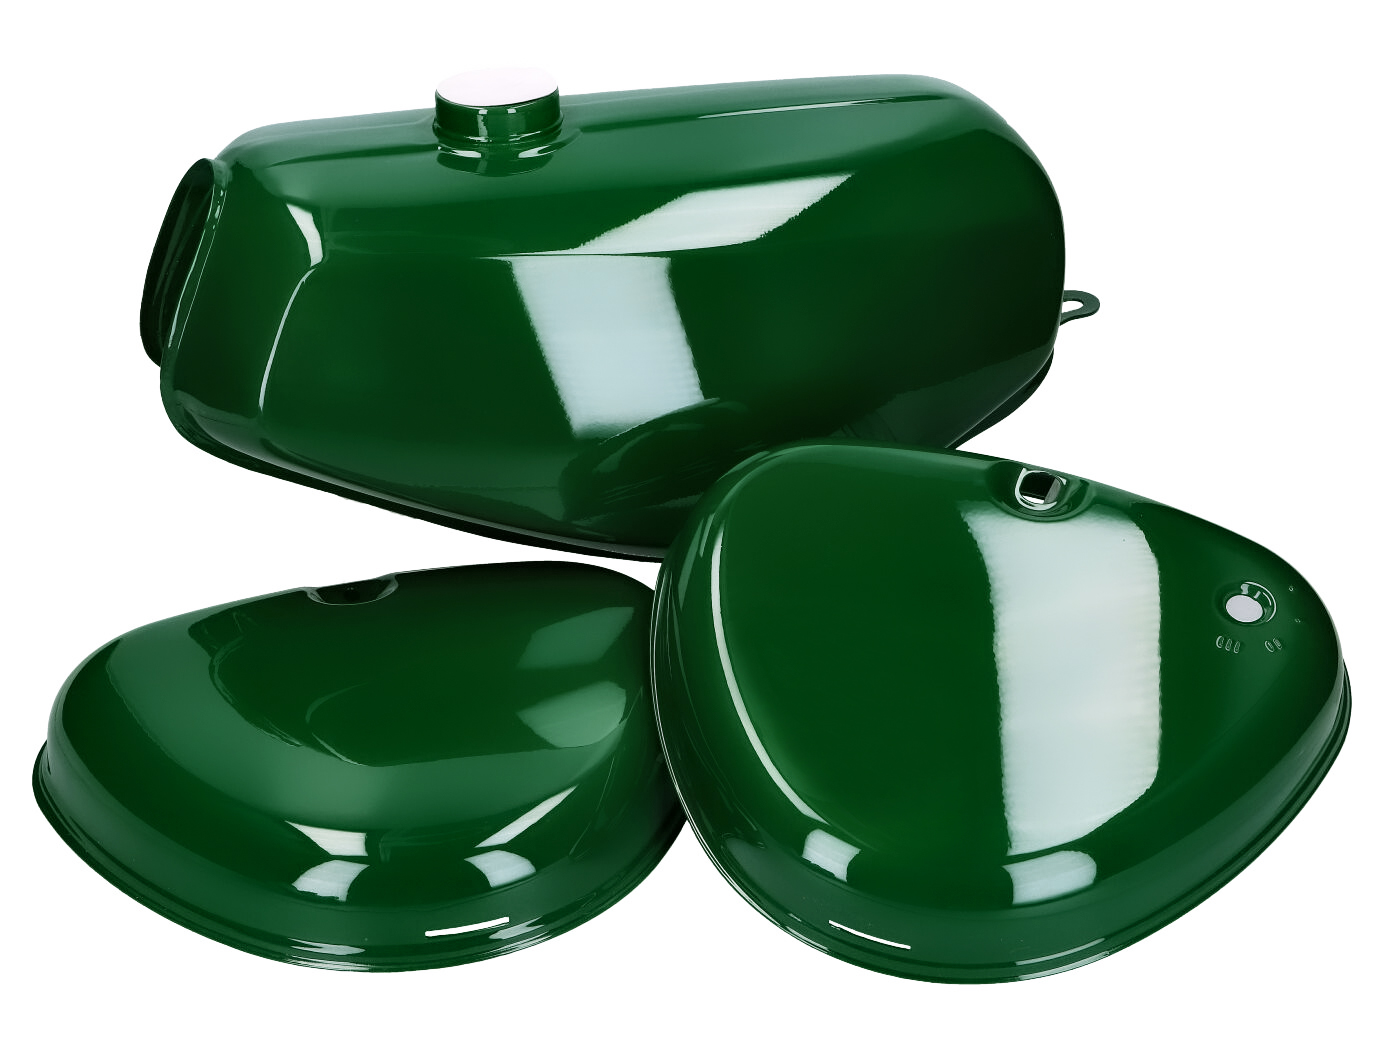 side cover Set: Tank pale green RAL 6018 S70 for Simson S50 S51